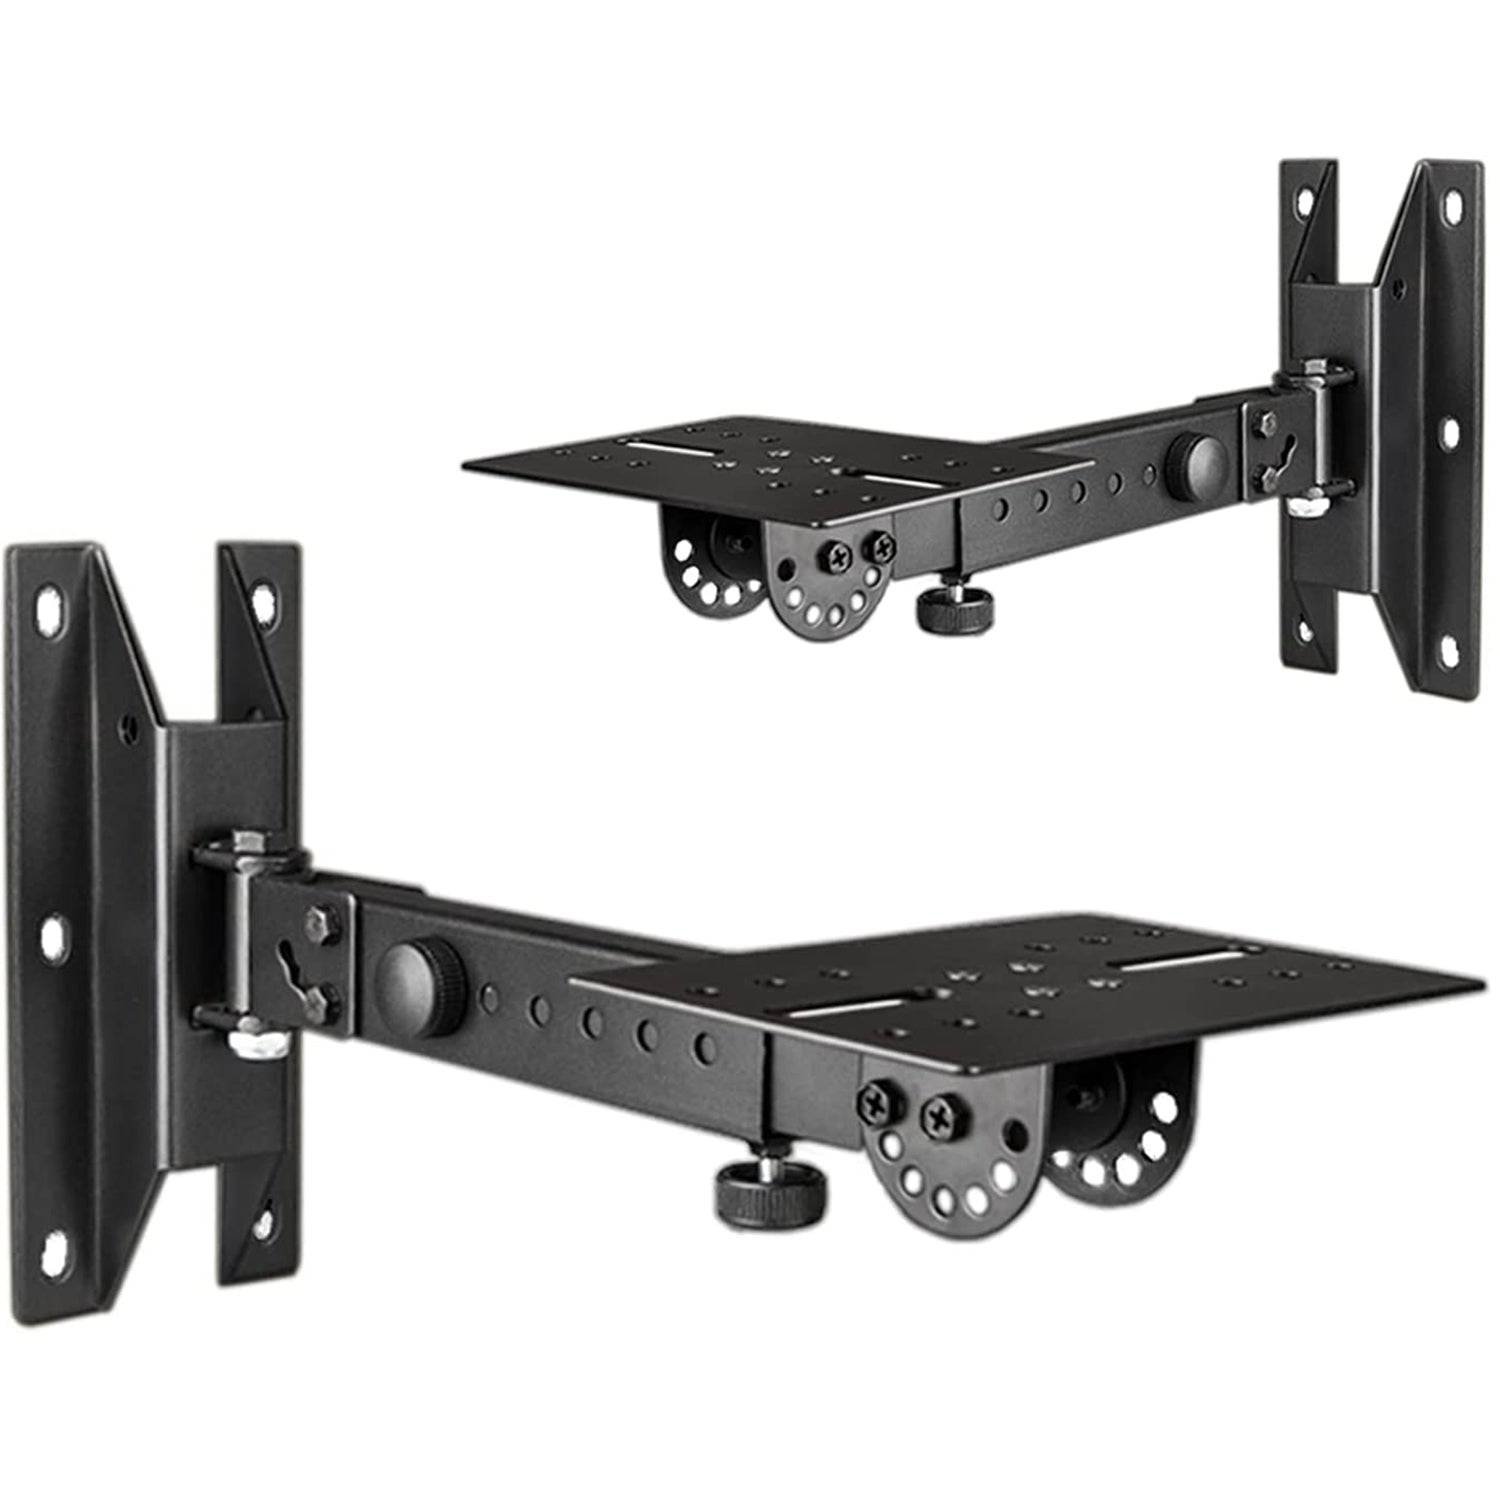 5Core 2 Pack Speaker Wall Mount Stand Bookshelf Rotatable Angle Adjustable WST 03 WST 03 Pair